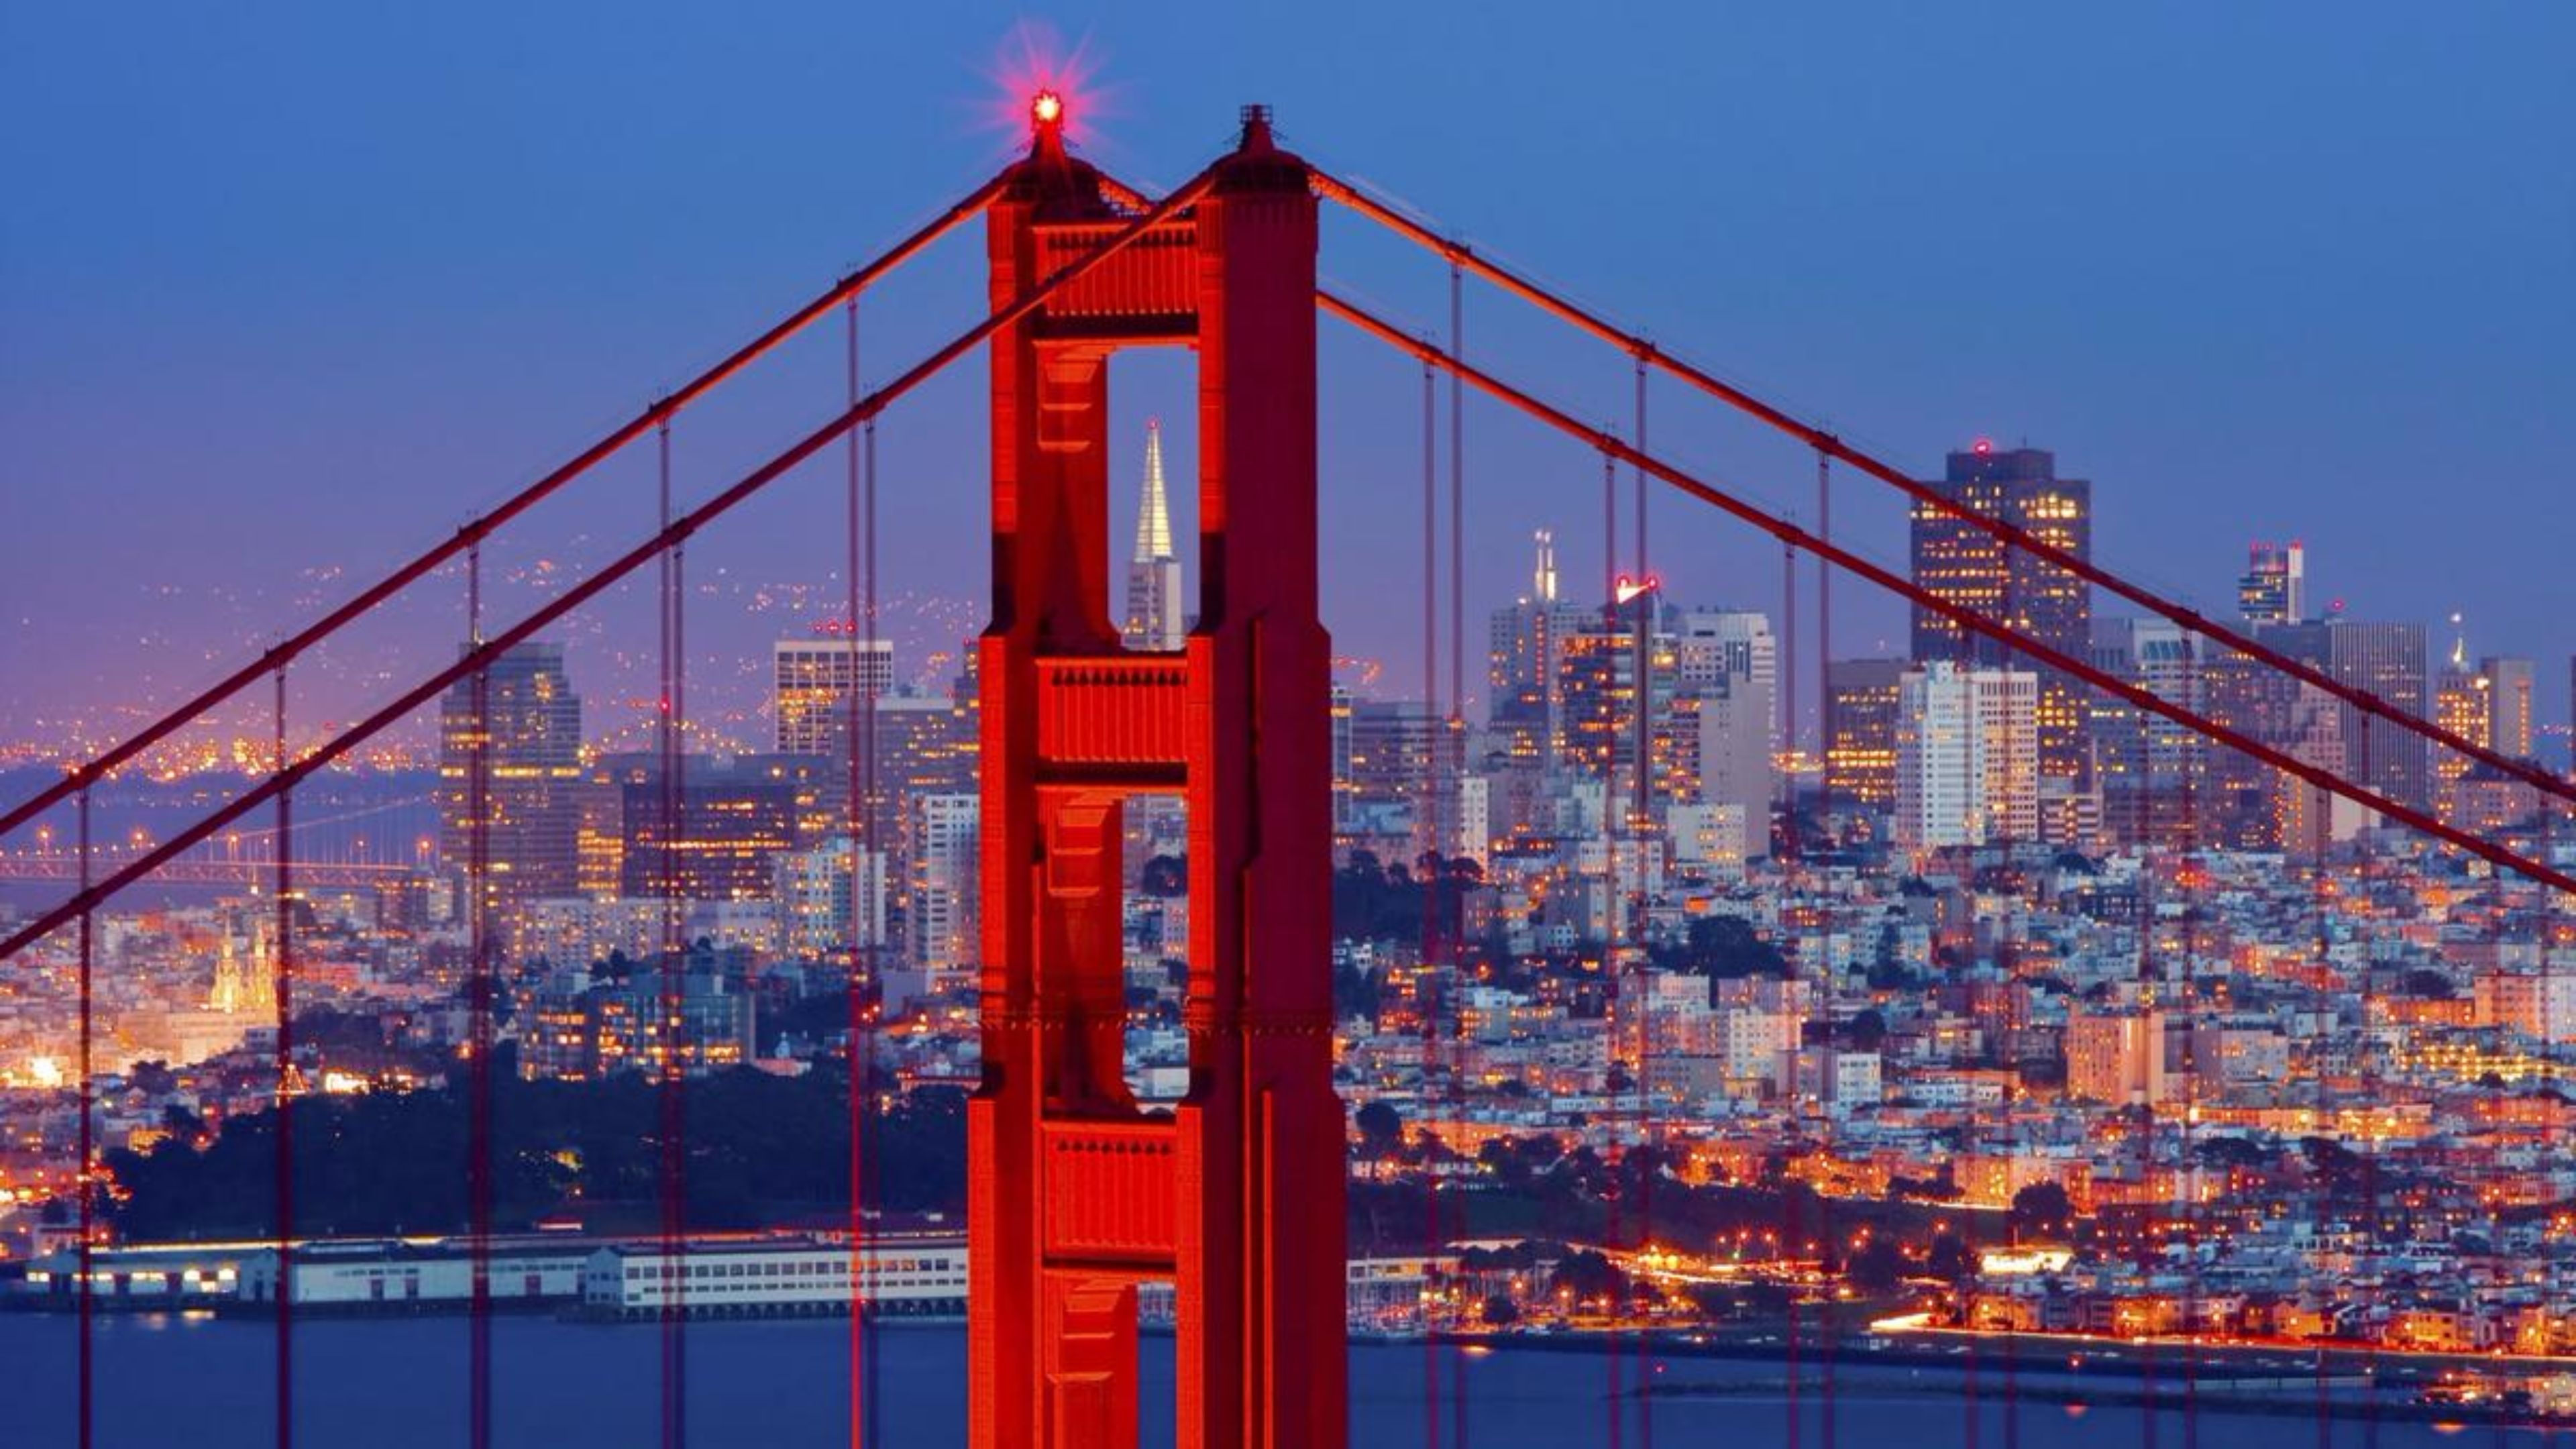 San Francisco: The fourth most populous city in California. 3840x2160 4K Wallpaper.